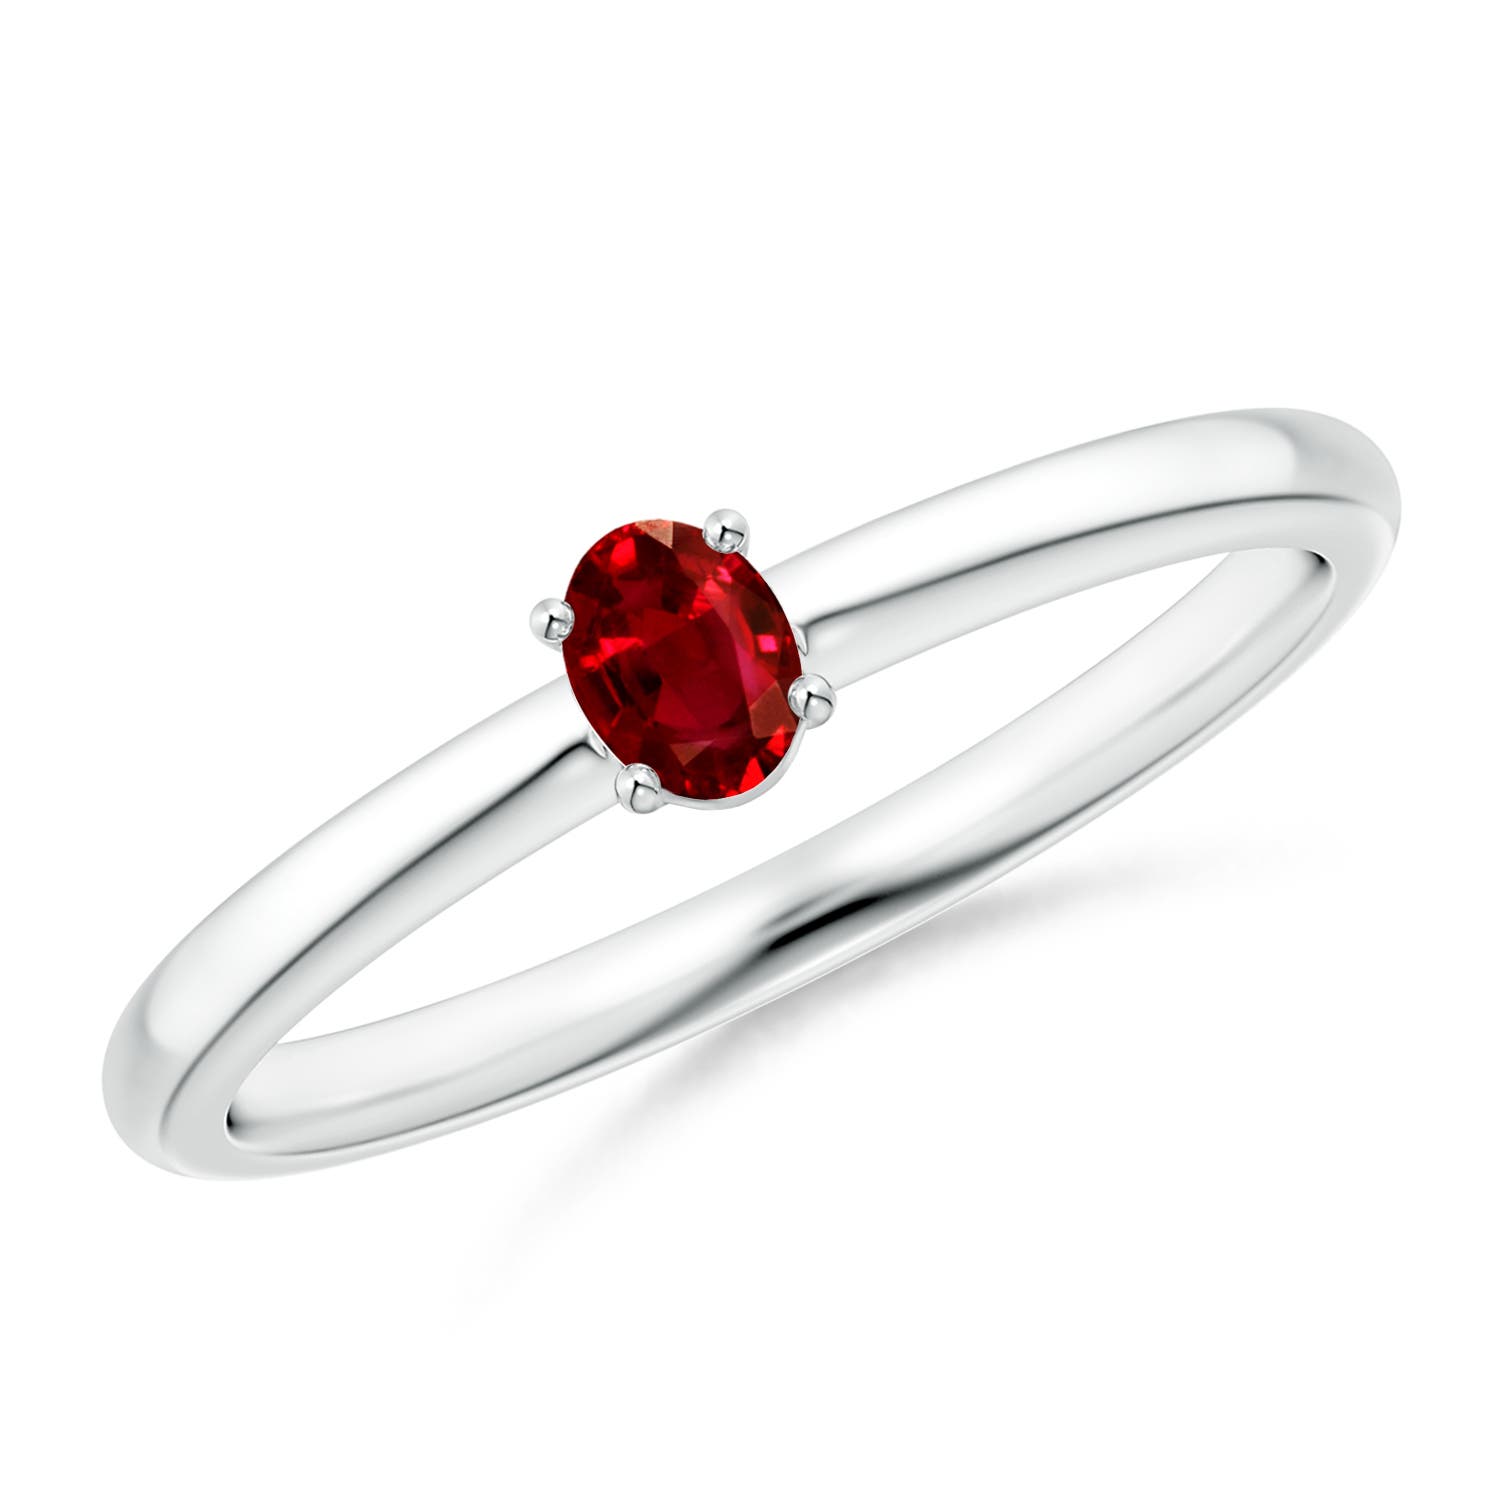 AAAA - Ruby / 0.2 CT / 14 KT White Gold